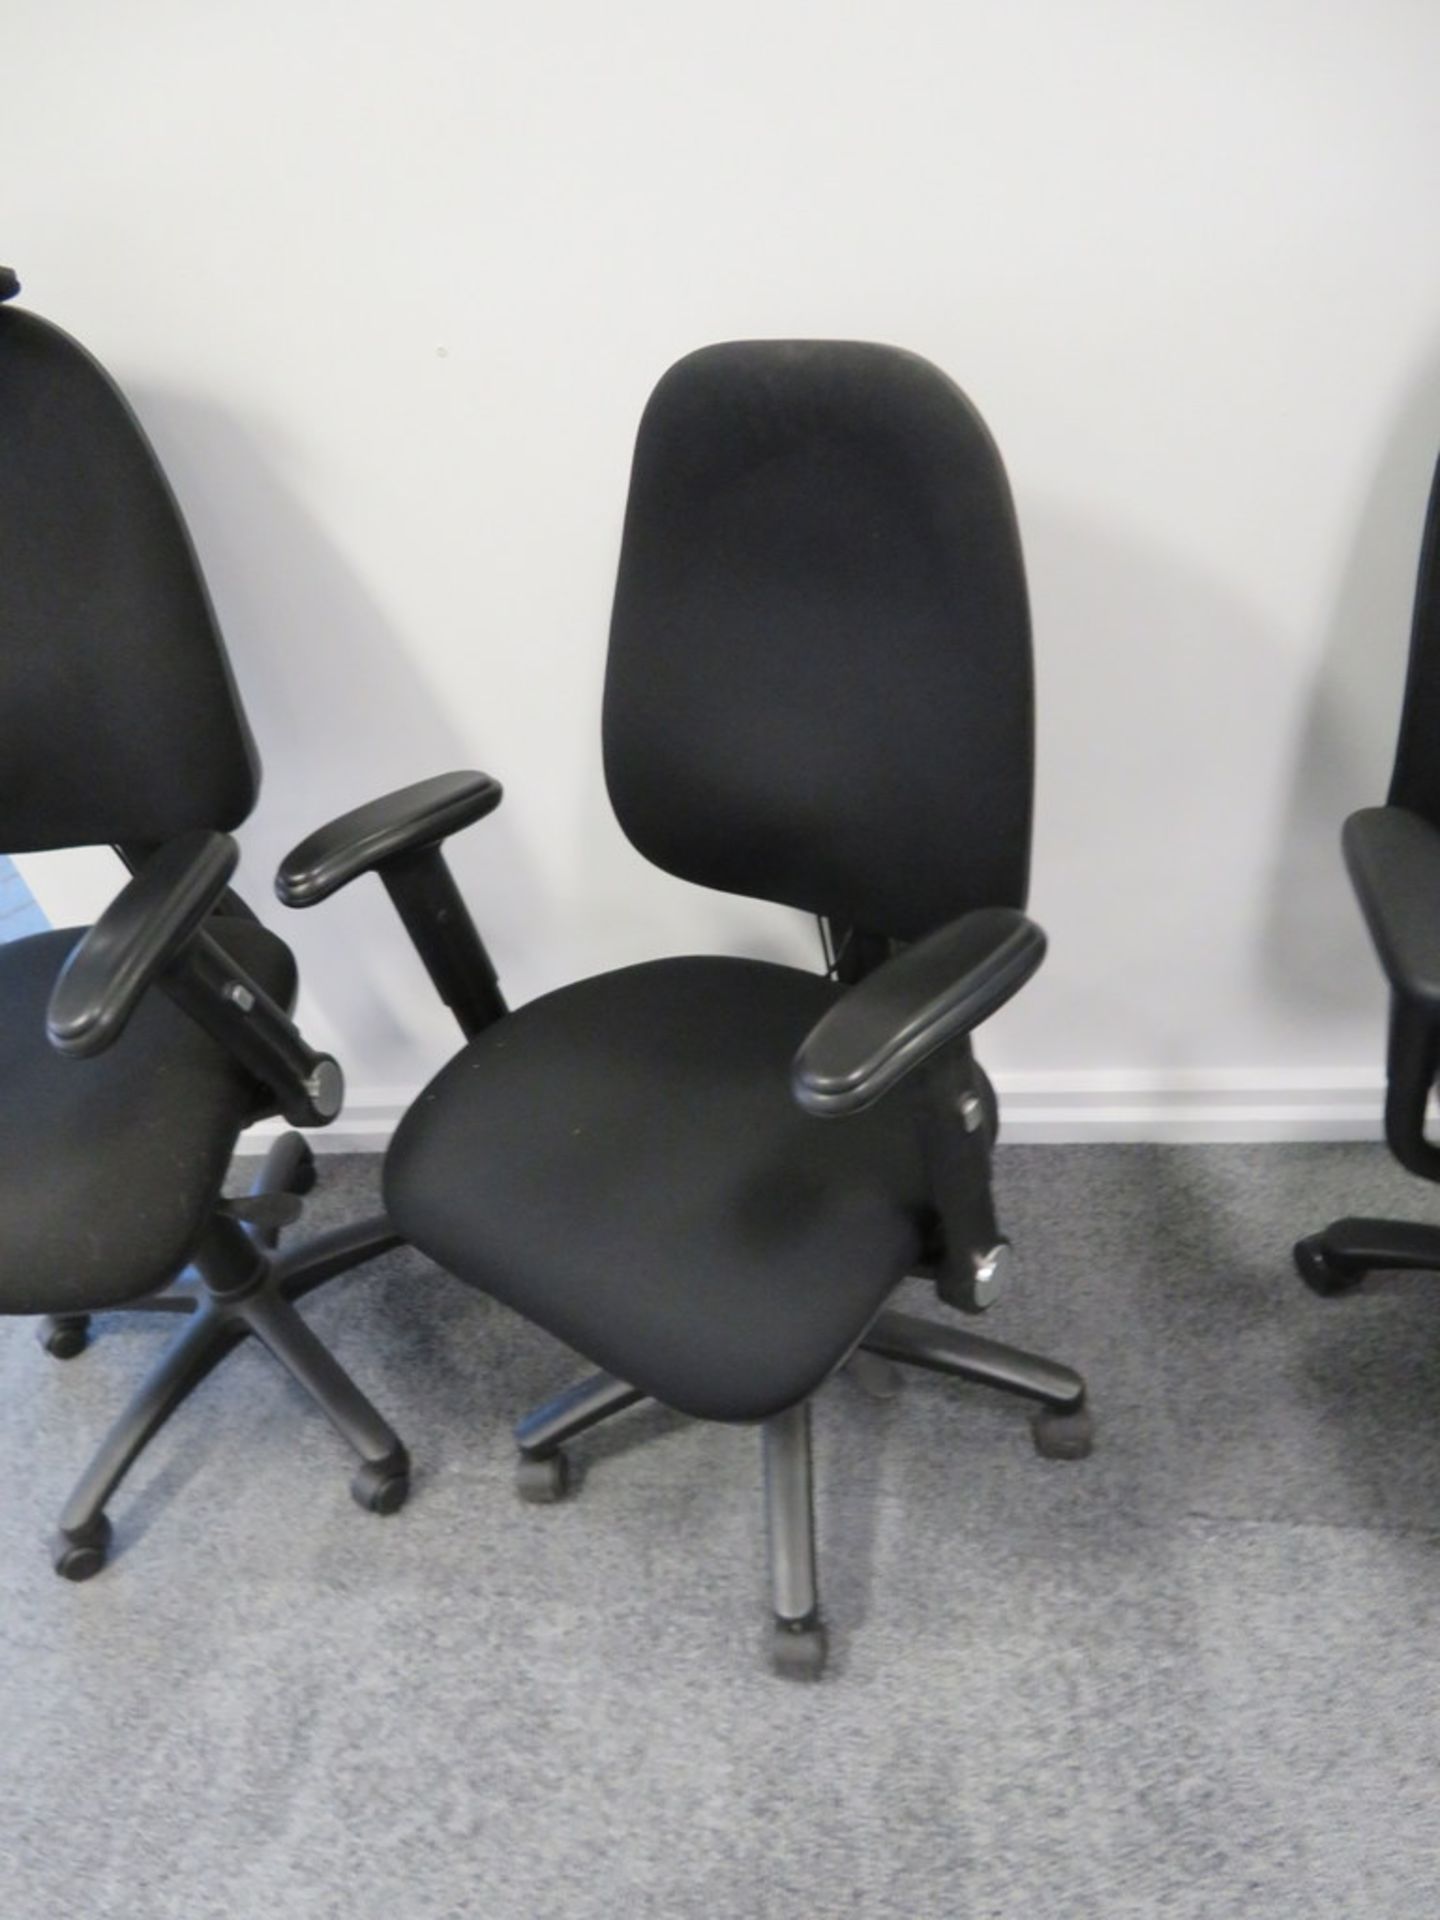 5x Adjustable Office Chairs. Varying Condition. - Image 4 of 5